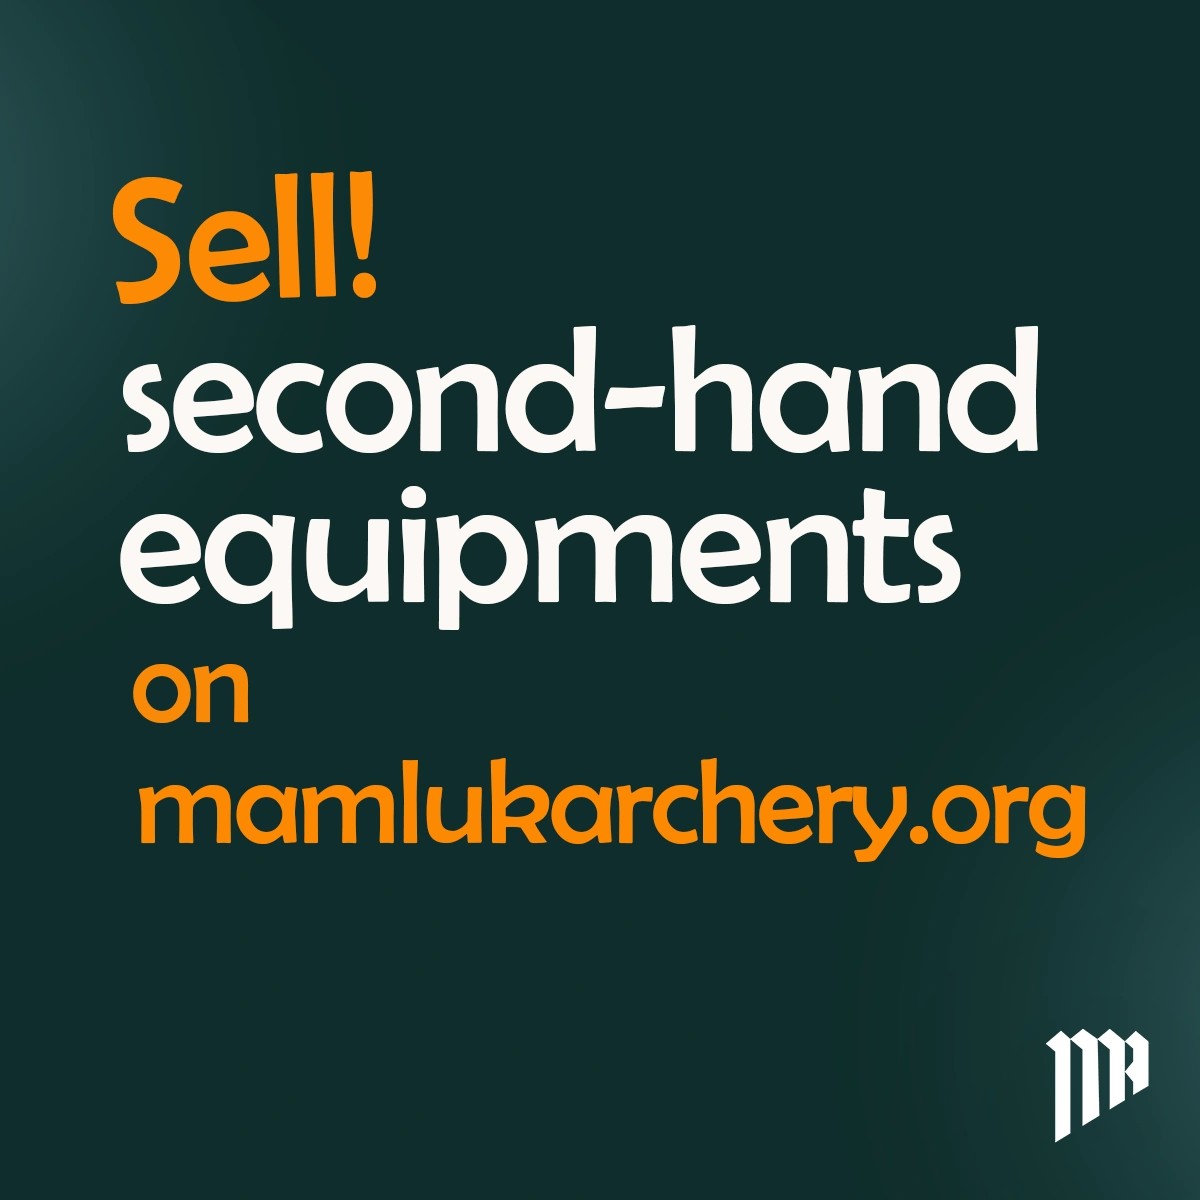 The Sales Service Fee / To Sell Your Second-hand Equipments